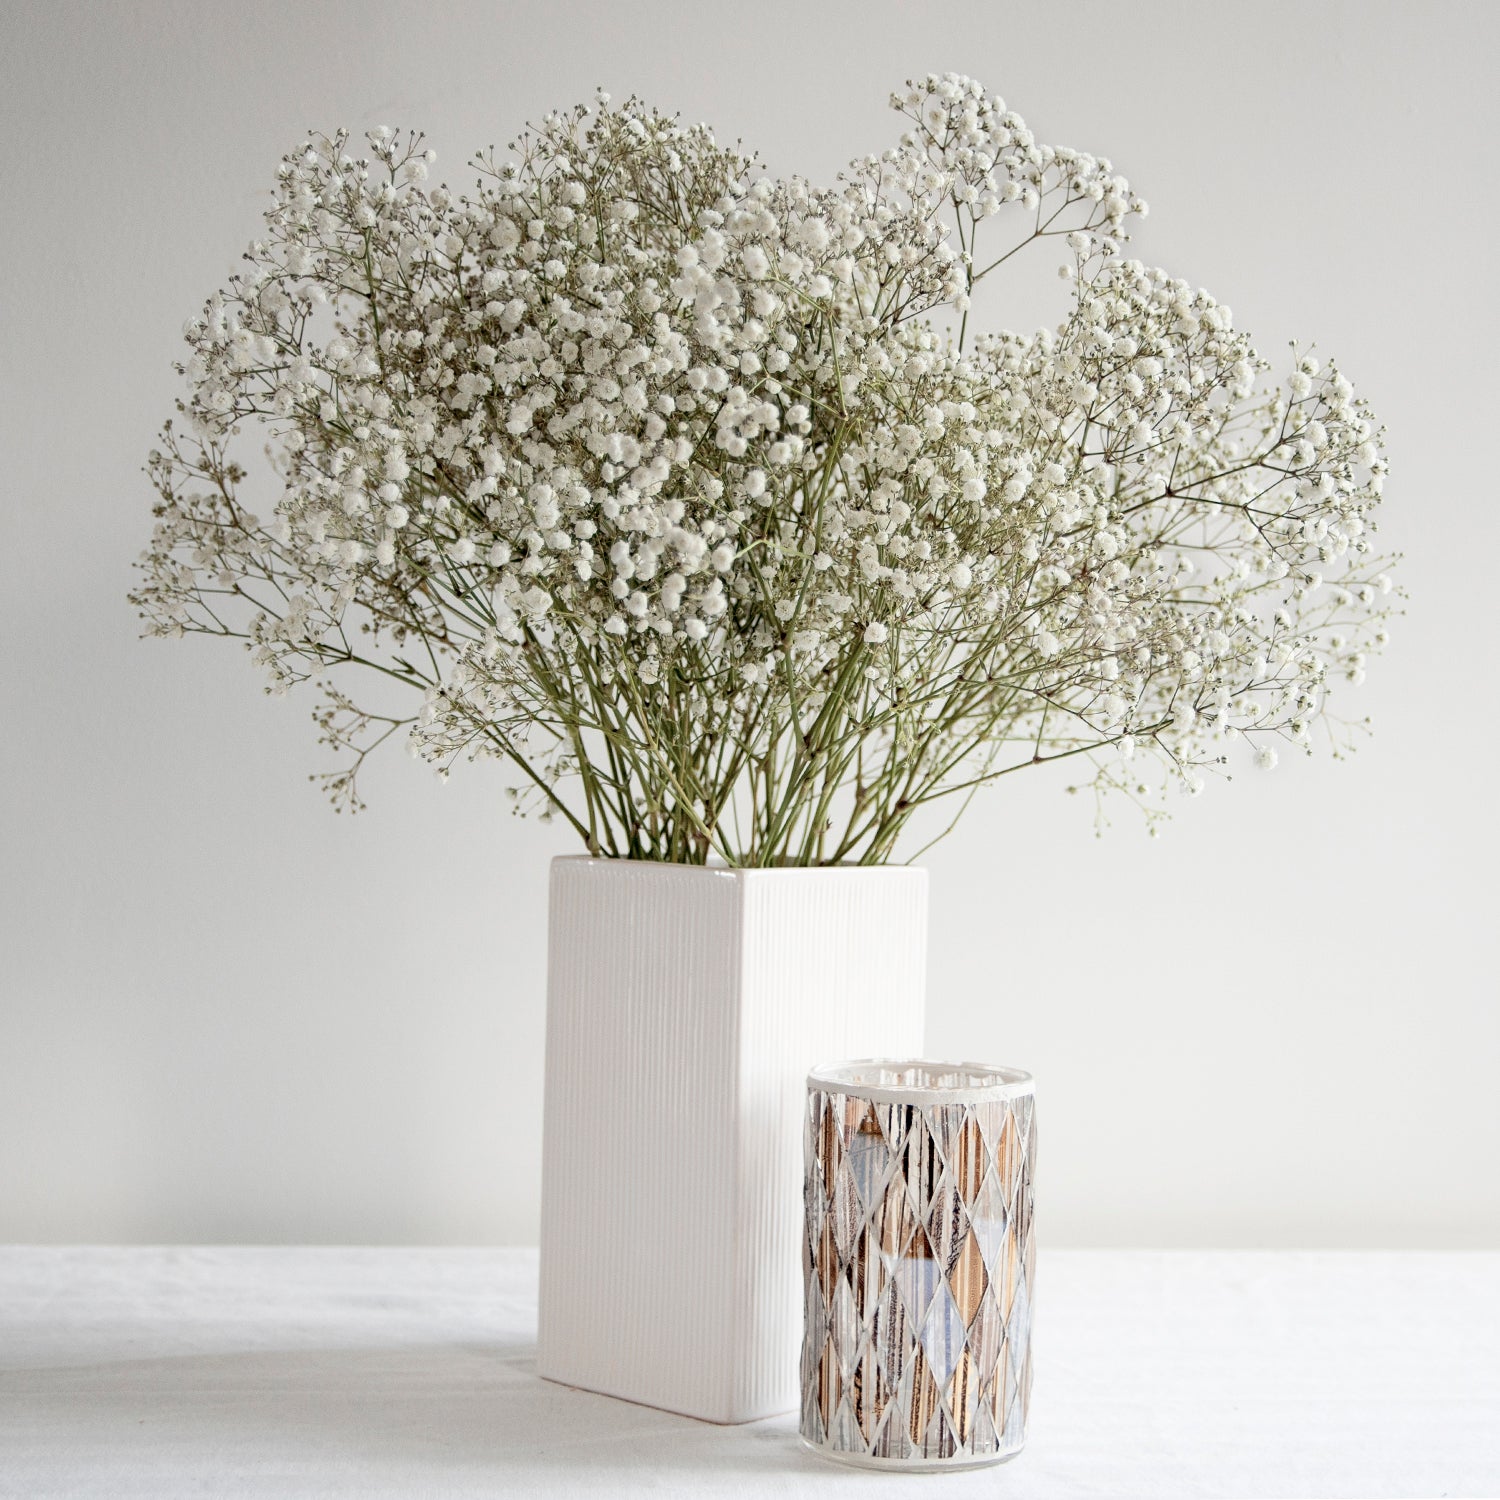 Natural Fresh Flowers - Baby's Breath, 8 Bunches, Size: 250 GR, White